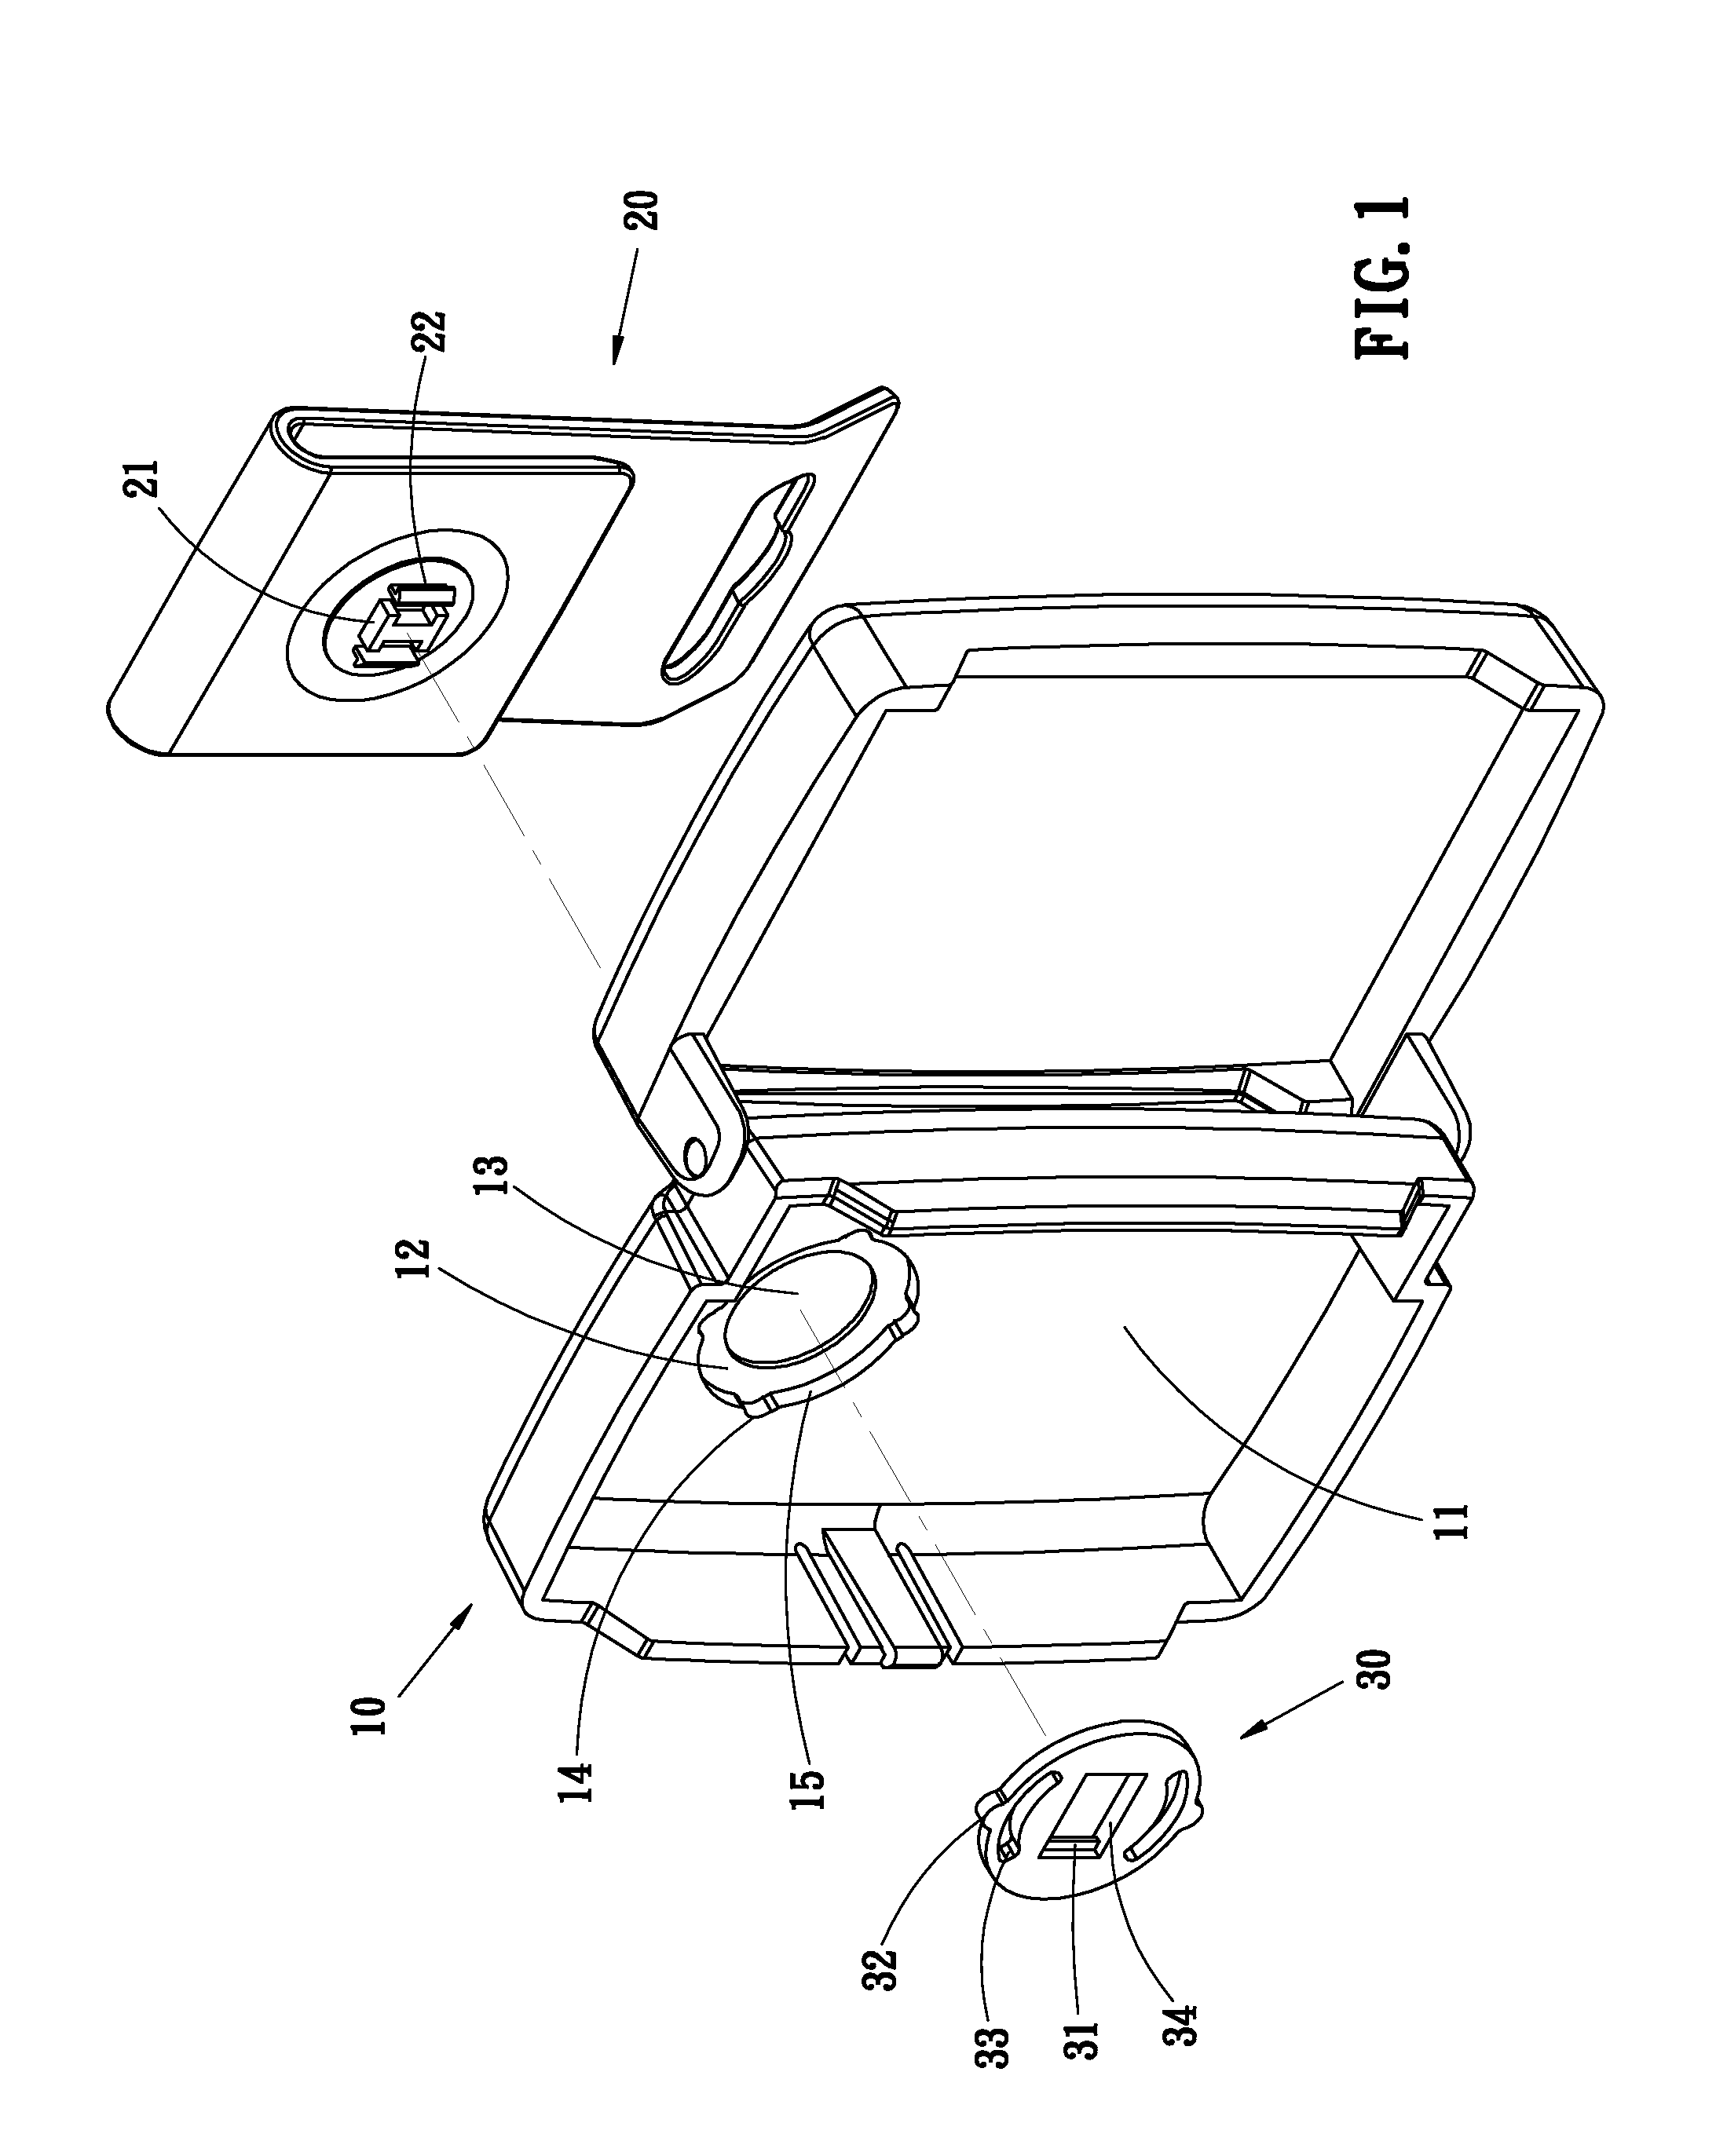 Rotatable securing device